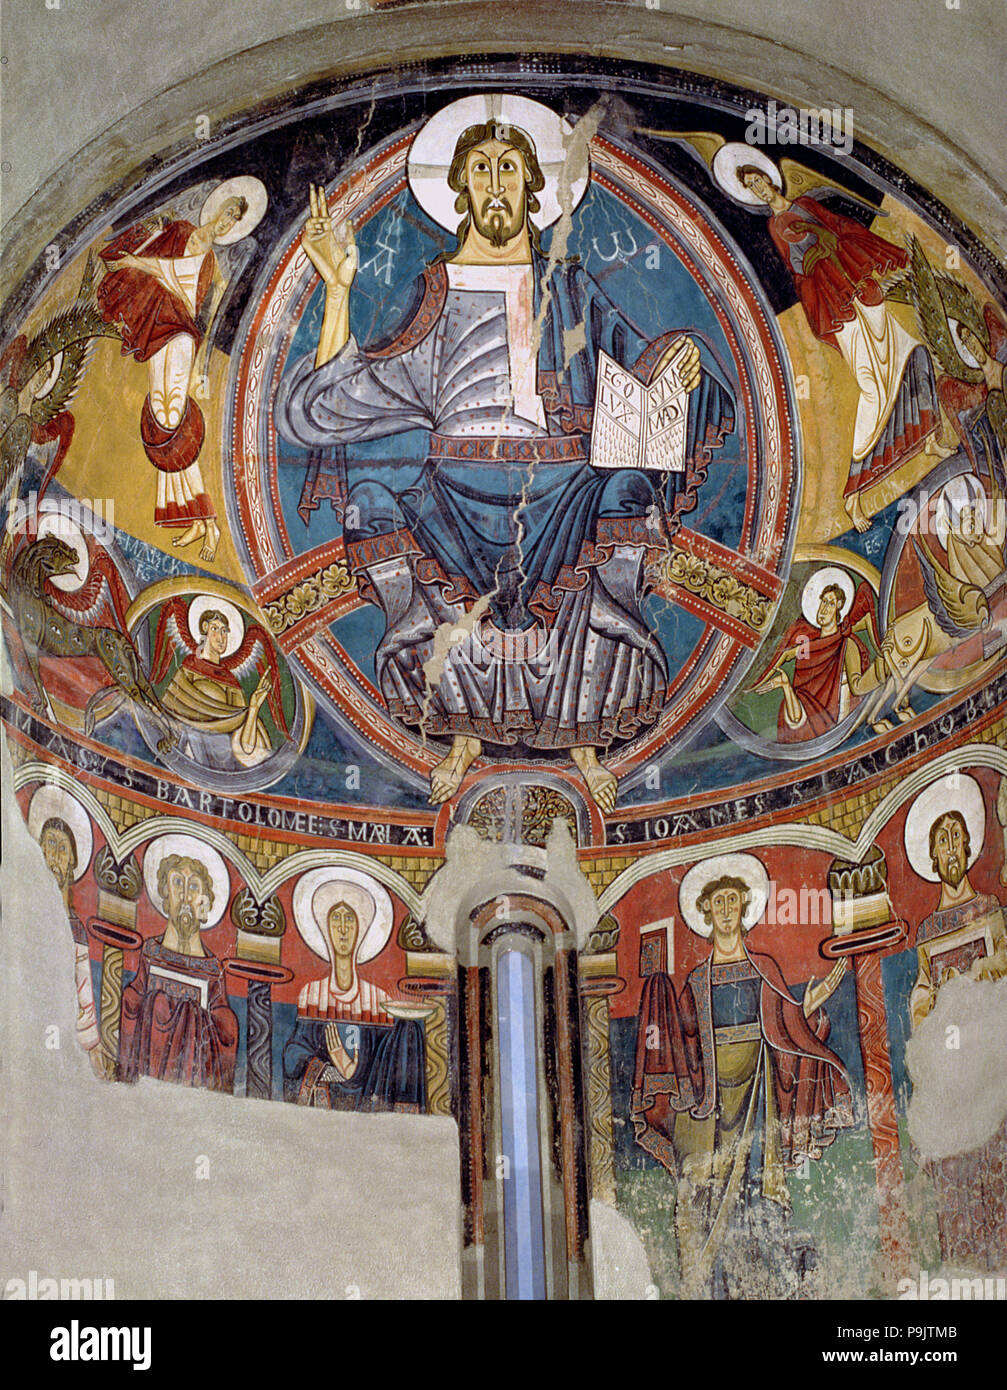 Pantocrator in the apse of the church of Sant Climent de Taüll in the Vall de Boi (Boi Valley), A… Stock Photo